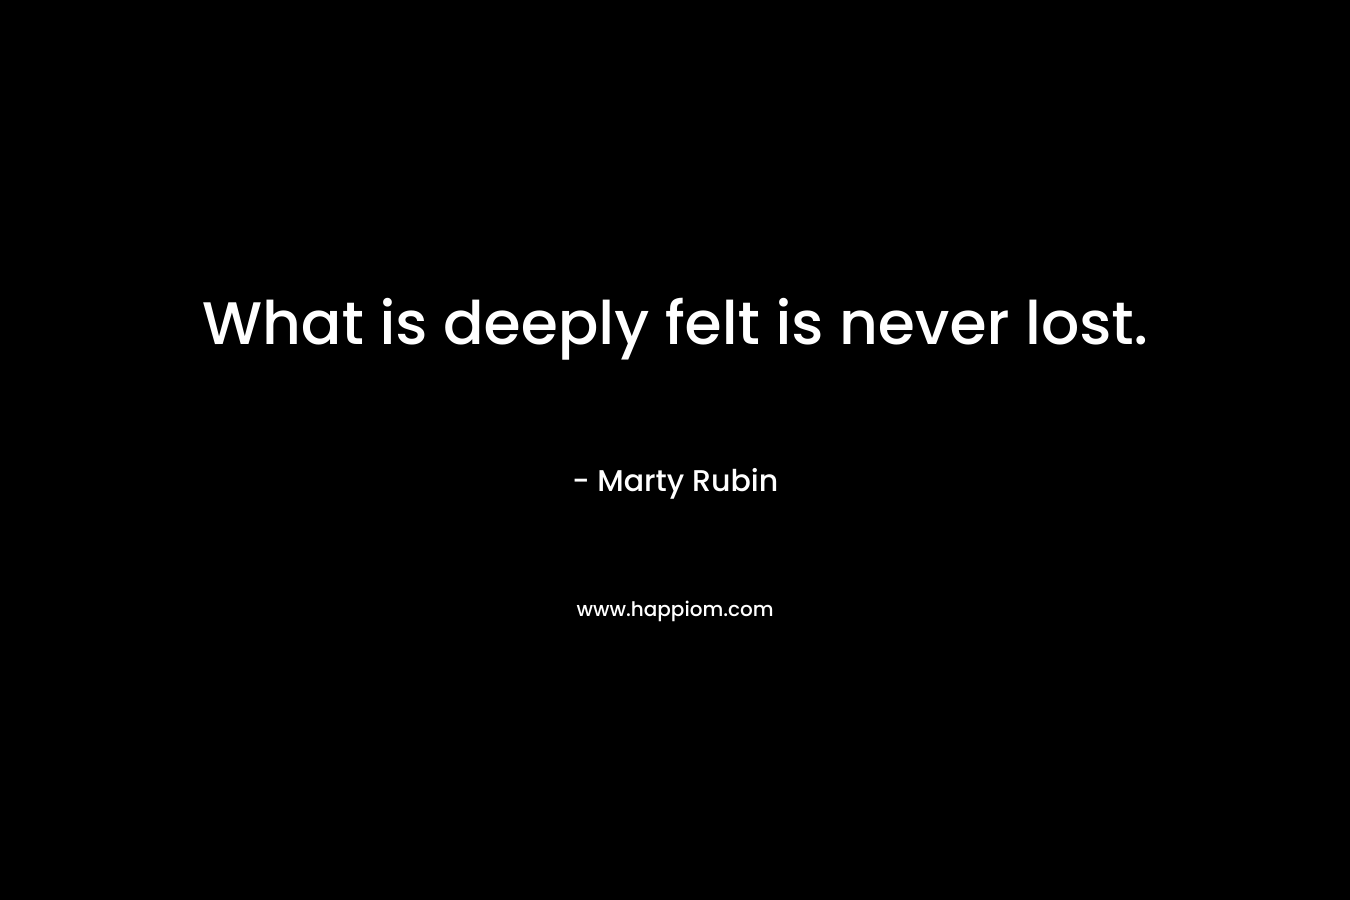 What is deeply felt is never lost.